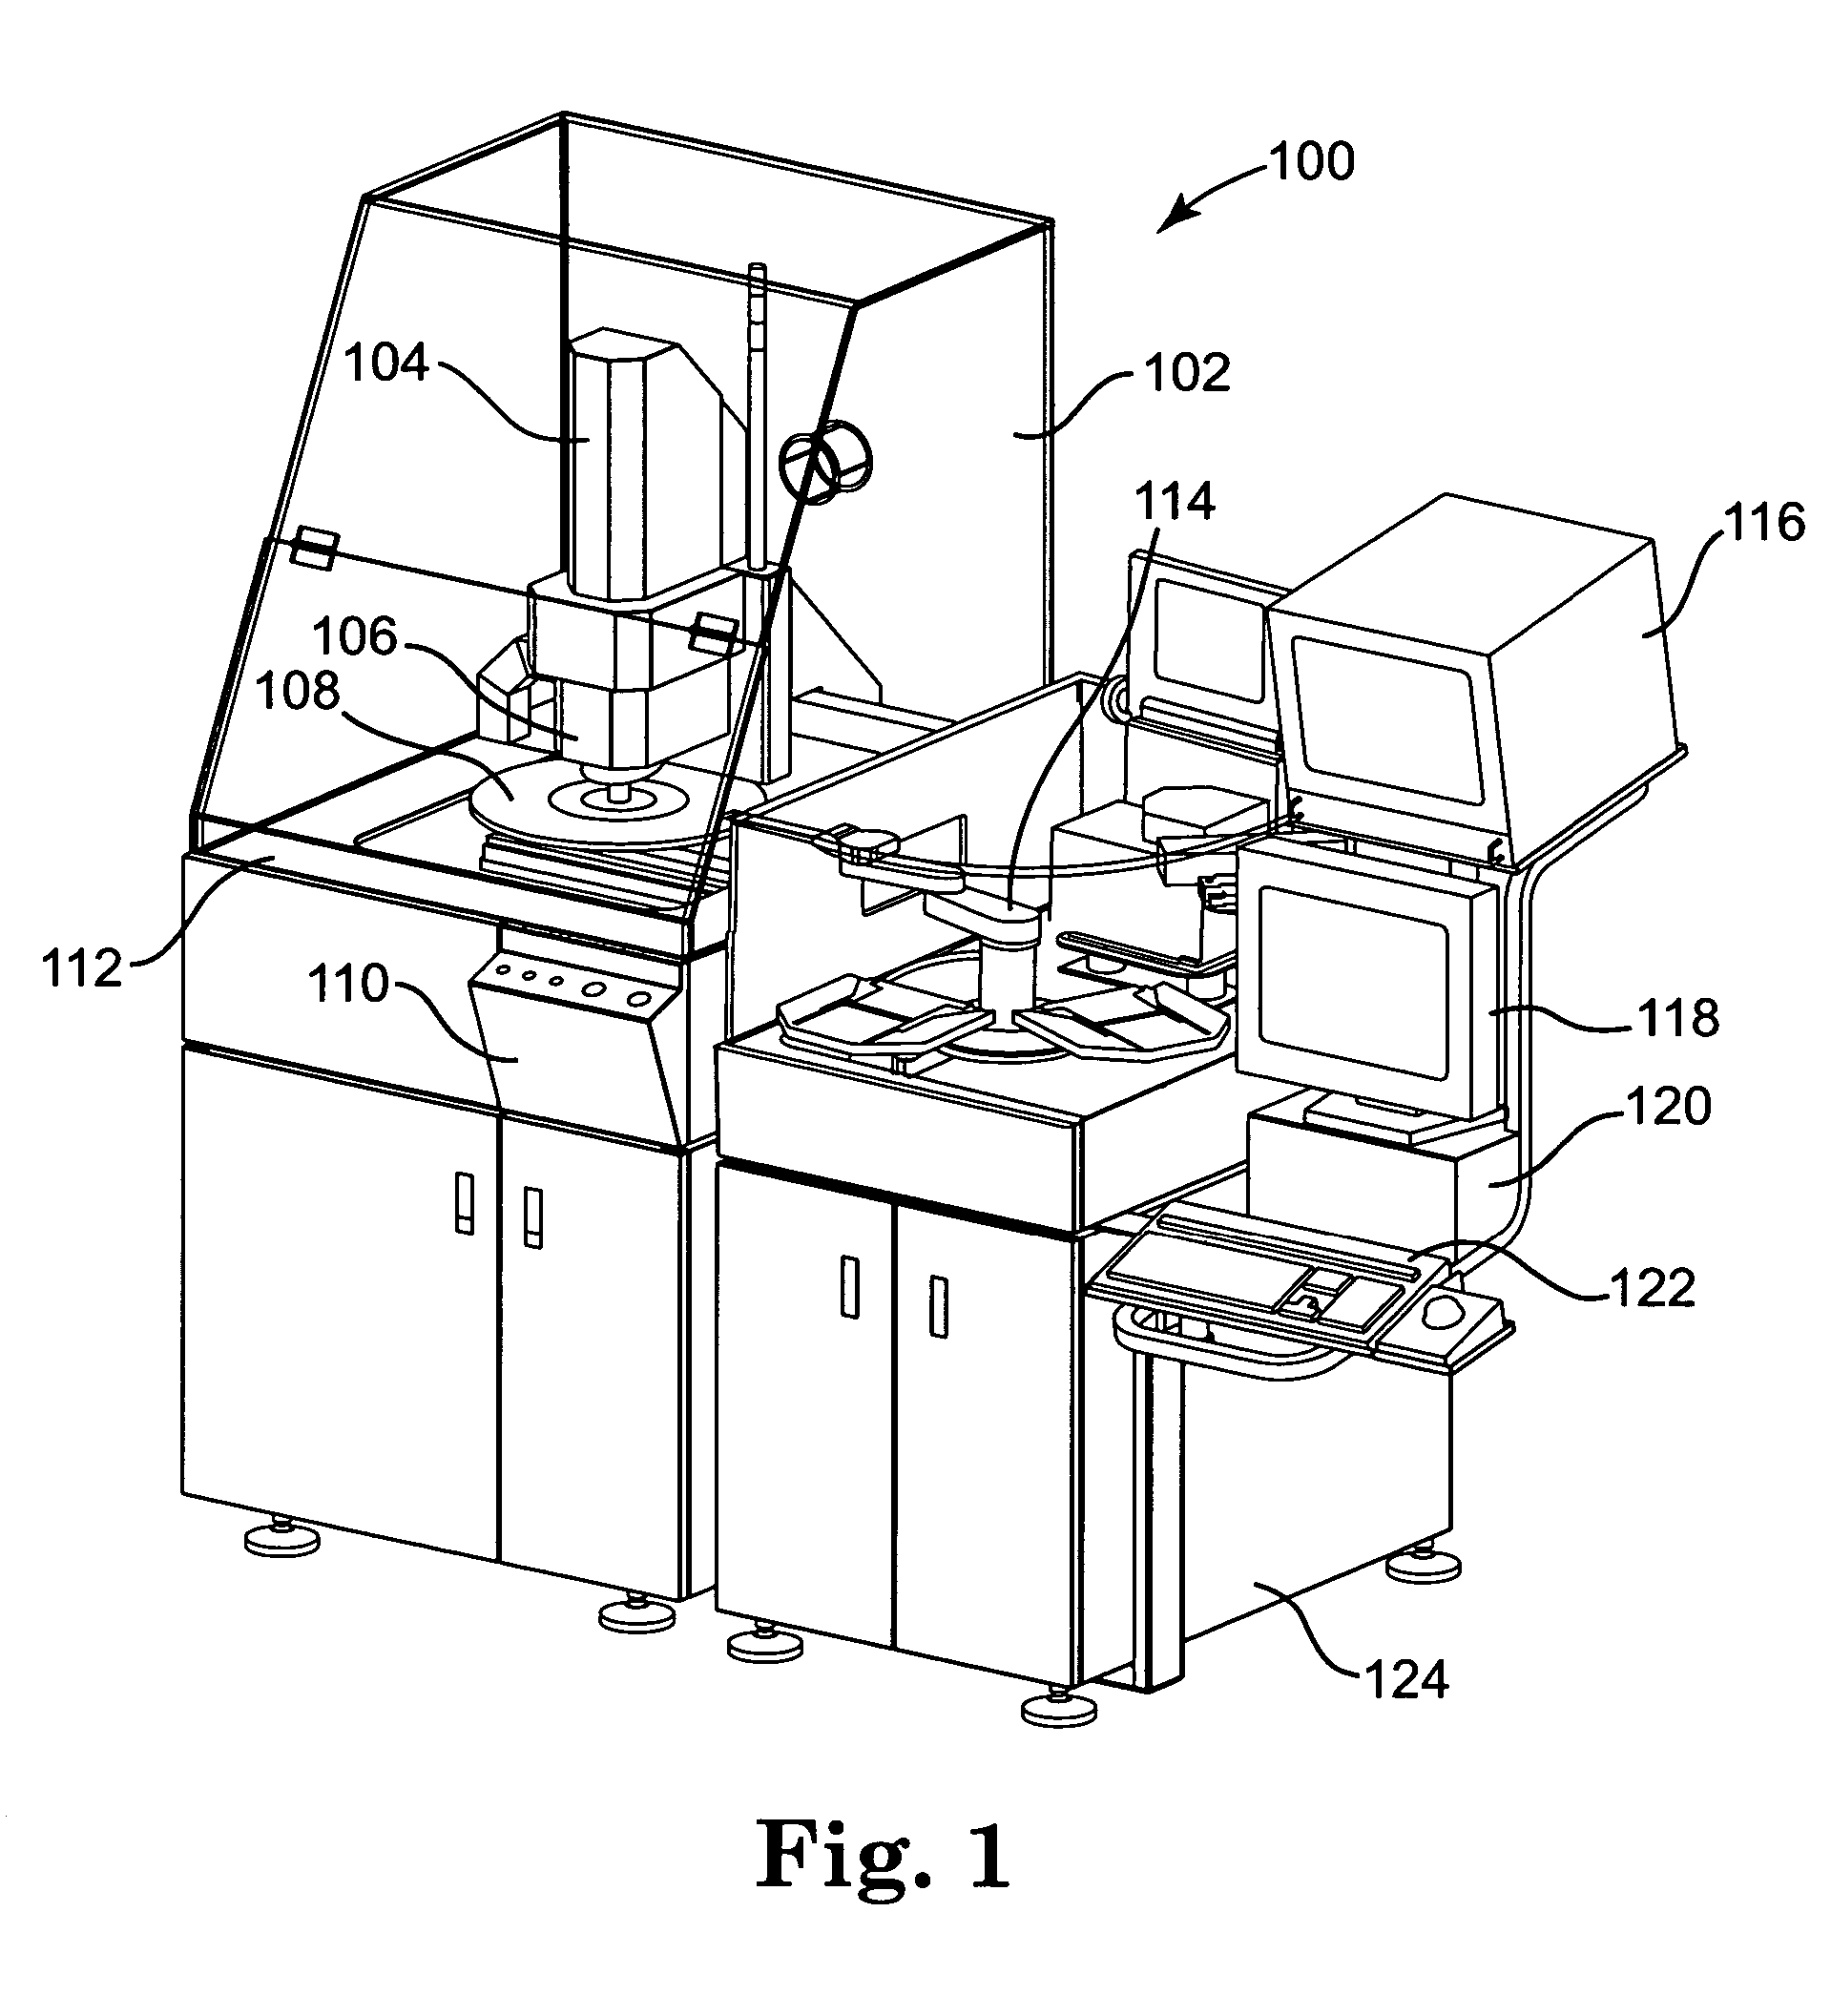 Product setup sharing for multiple inspection systems